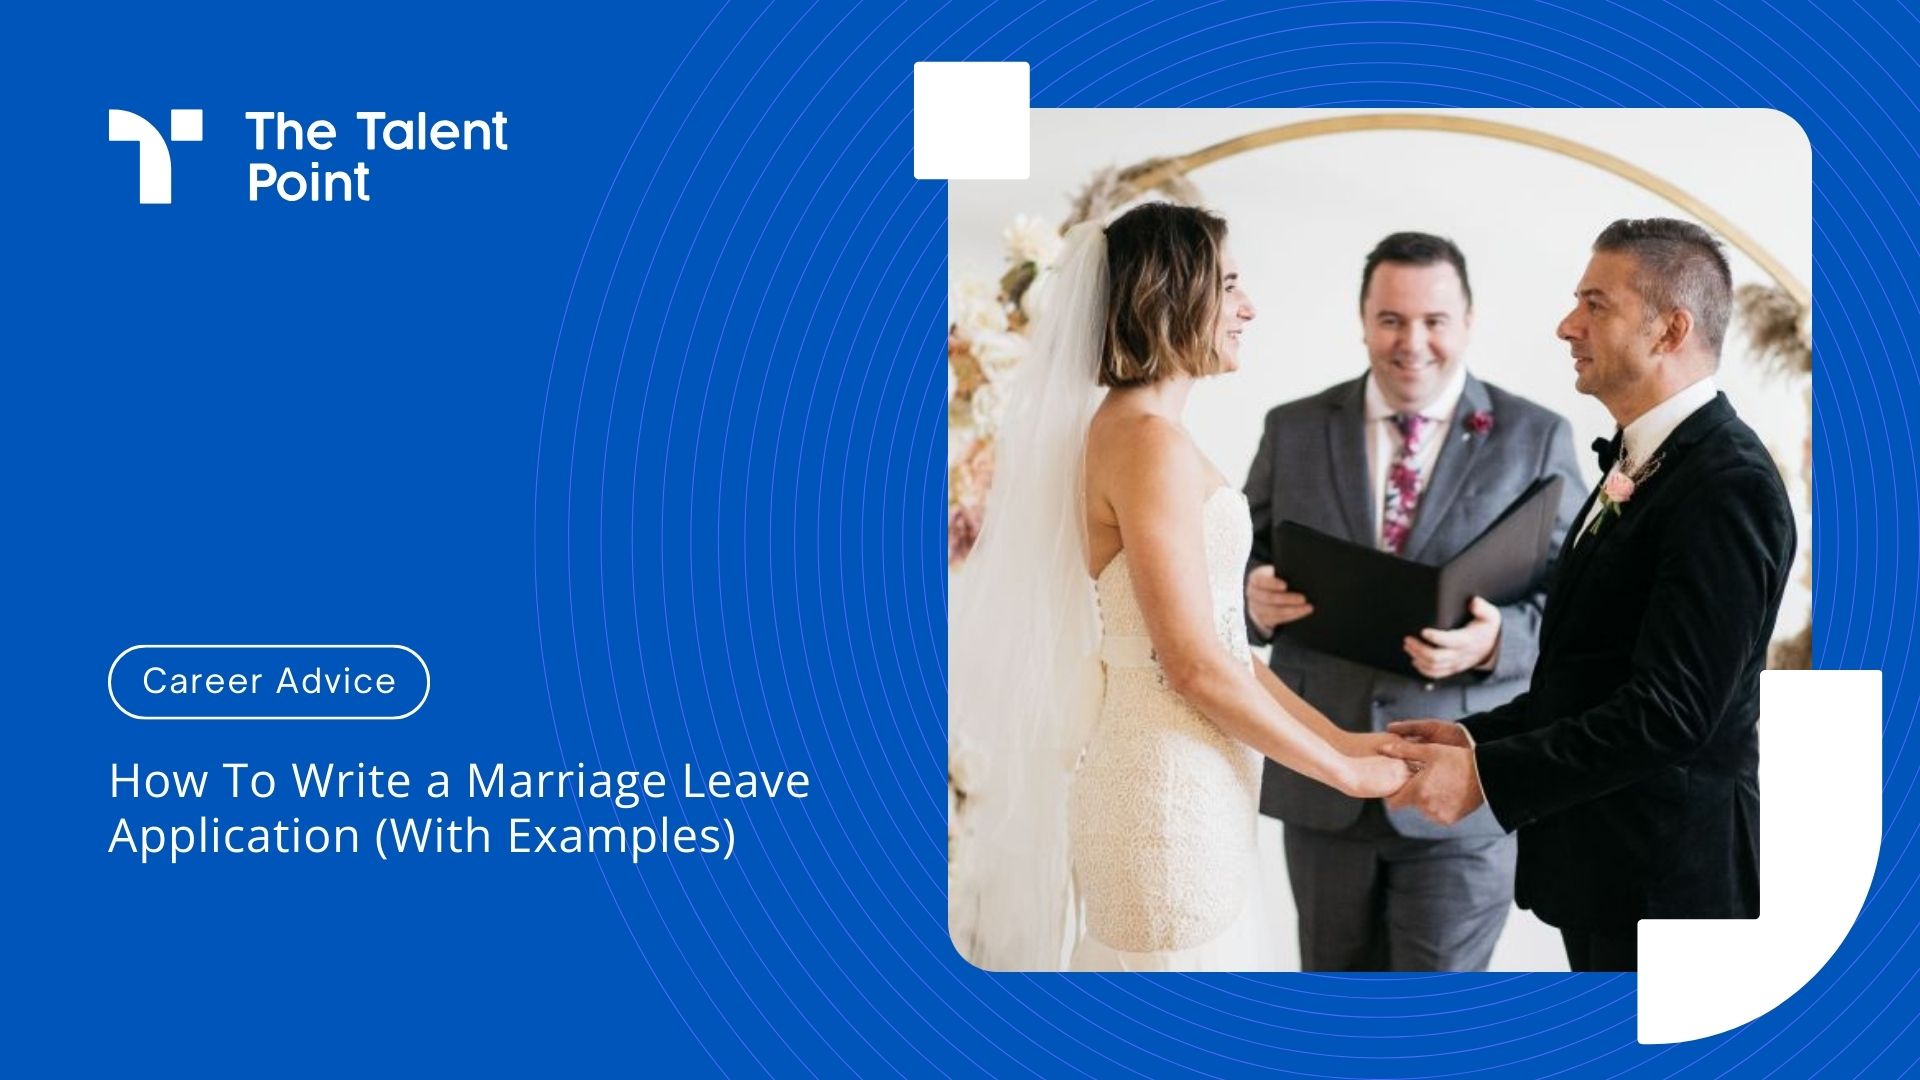 How to write a Marriage Leave Application - 4+ Scenarios - TalentPoint